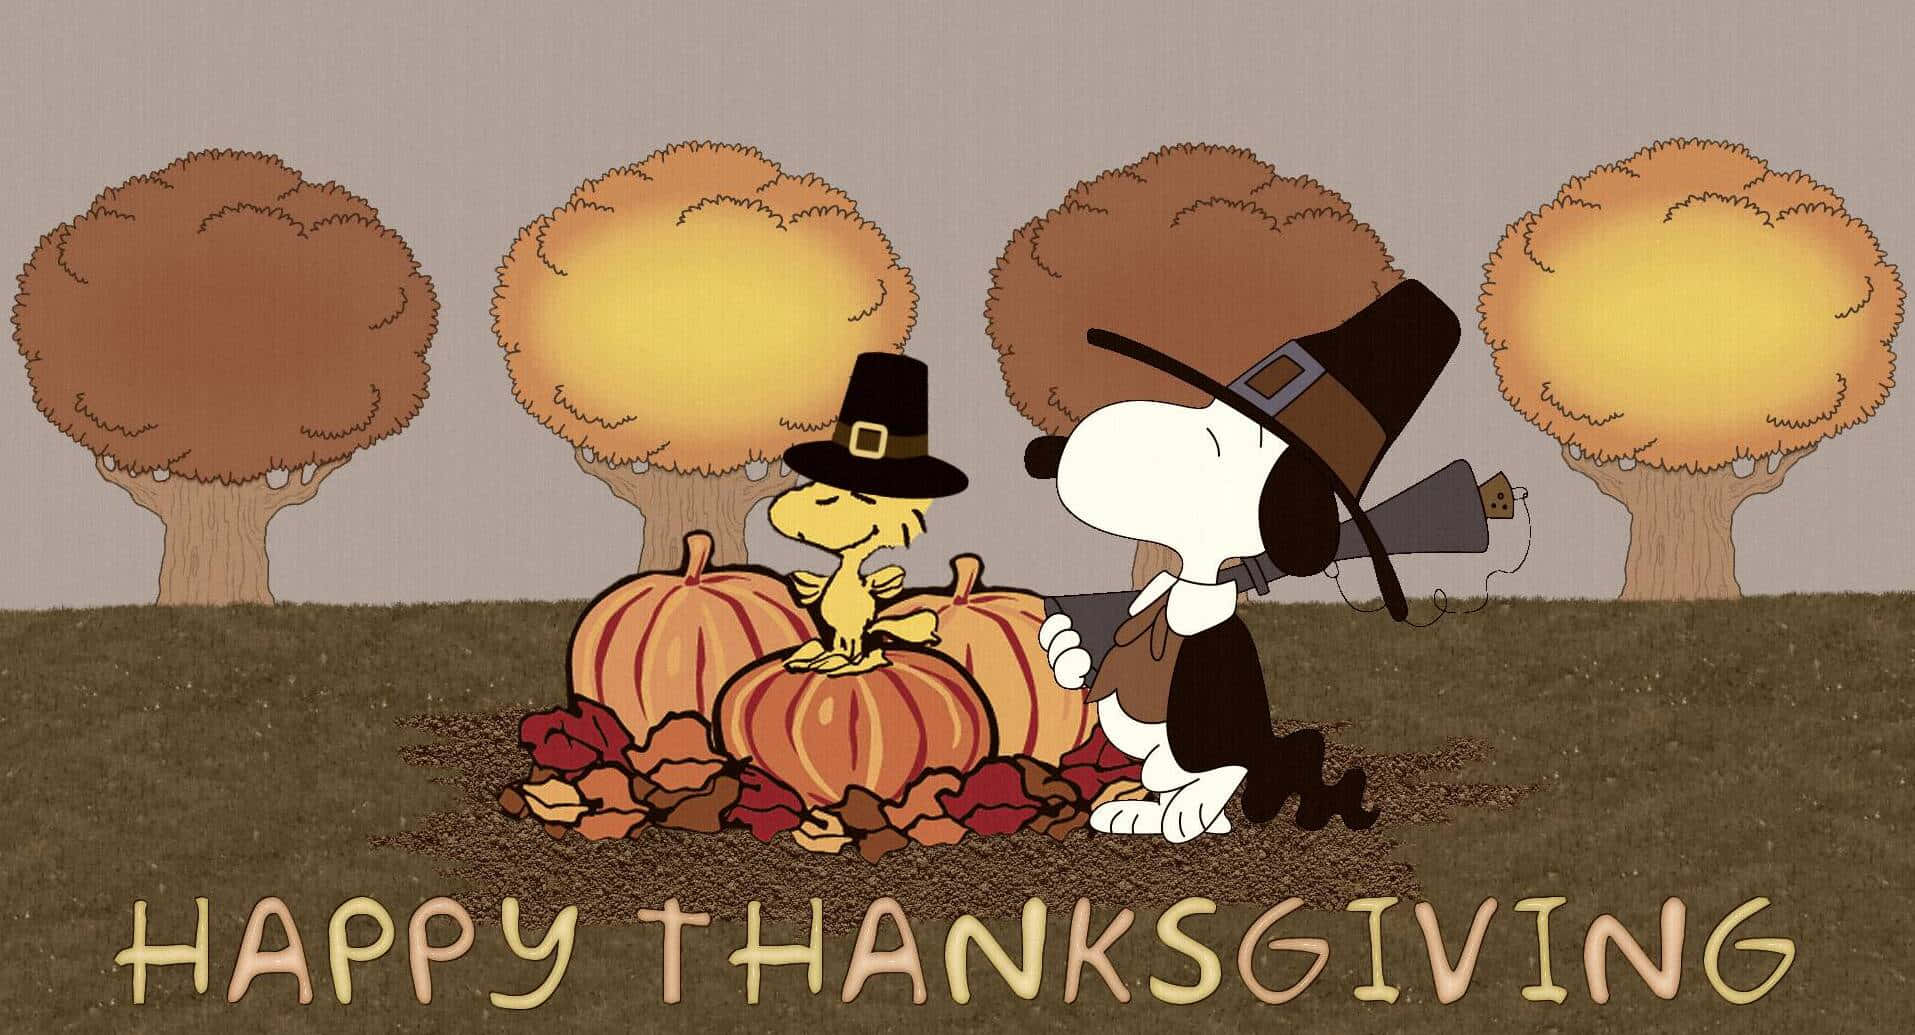 Snoopy And A Turkey With The Words Happy Thanksgiving